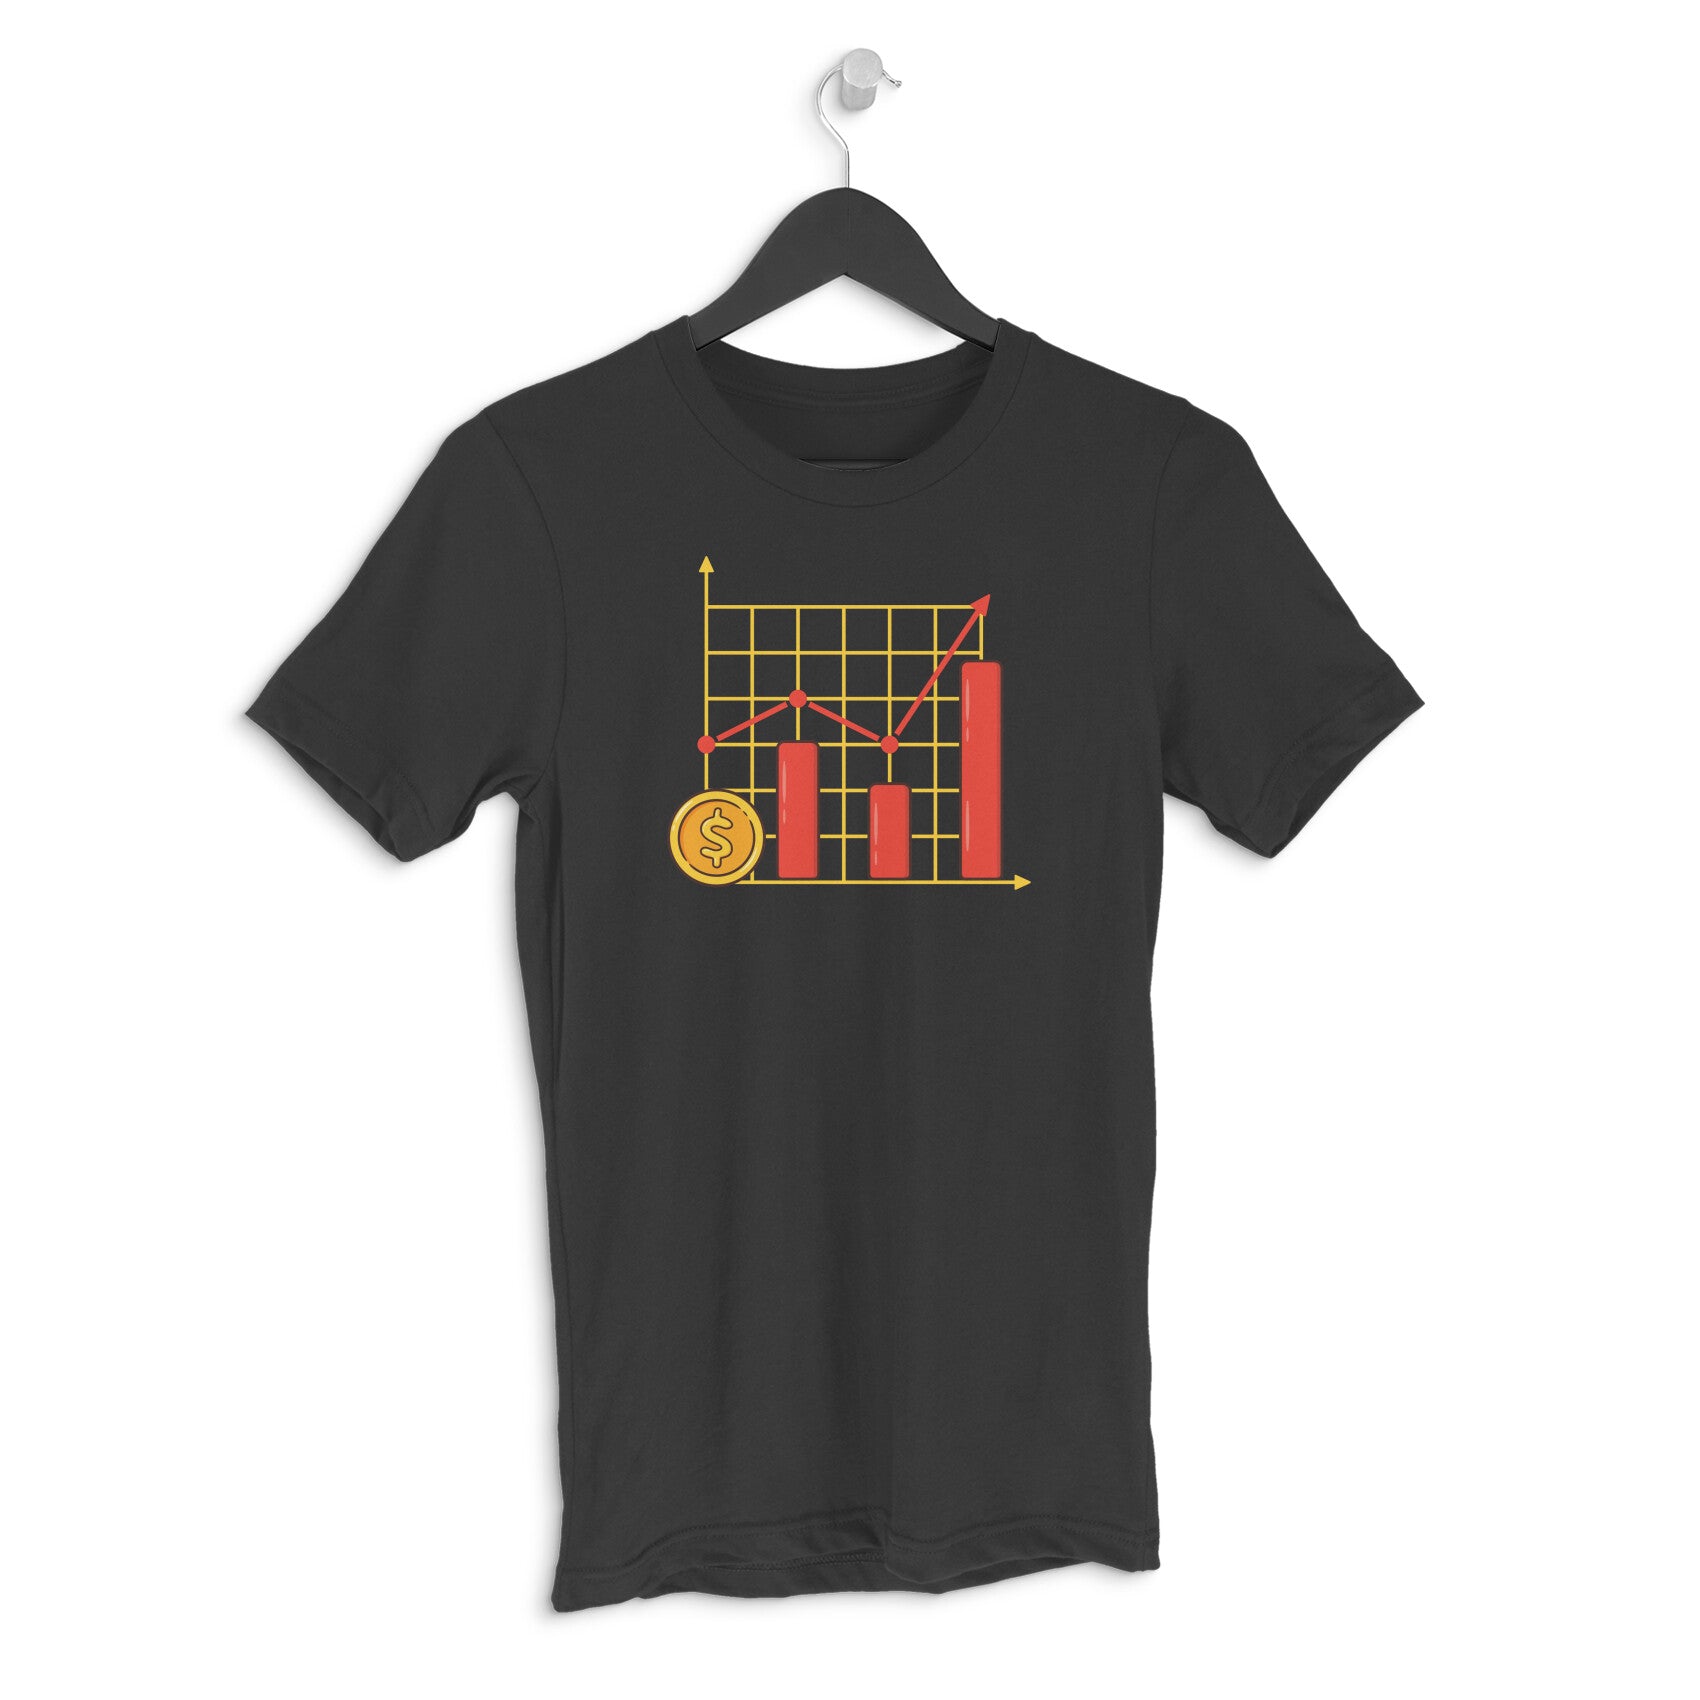 Trading Equity Curve T-Shirt